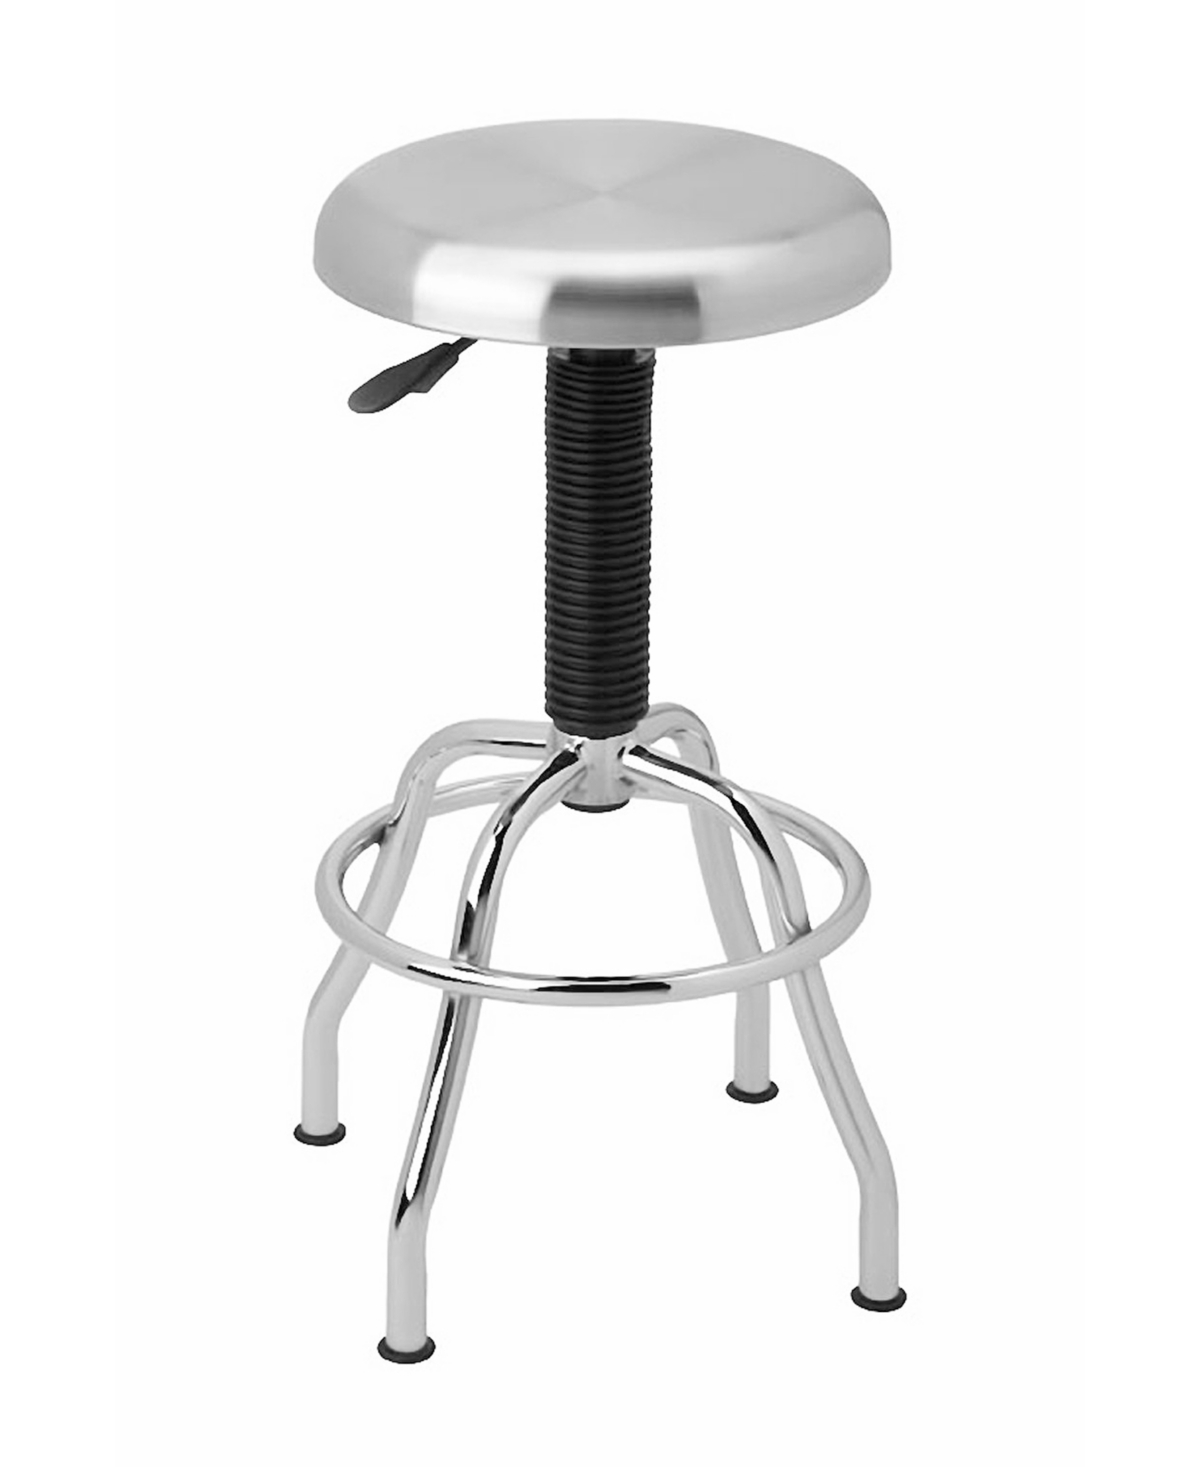 Stainless Steel Pneumatic Work Stool - Silver